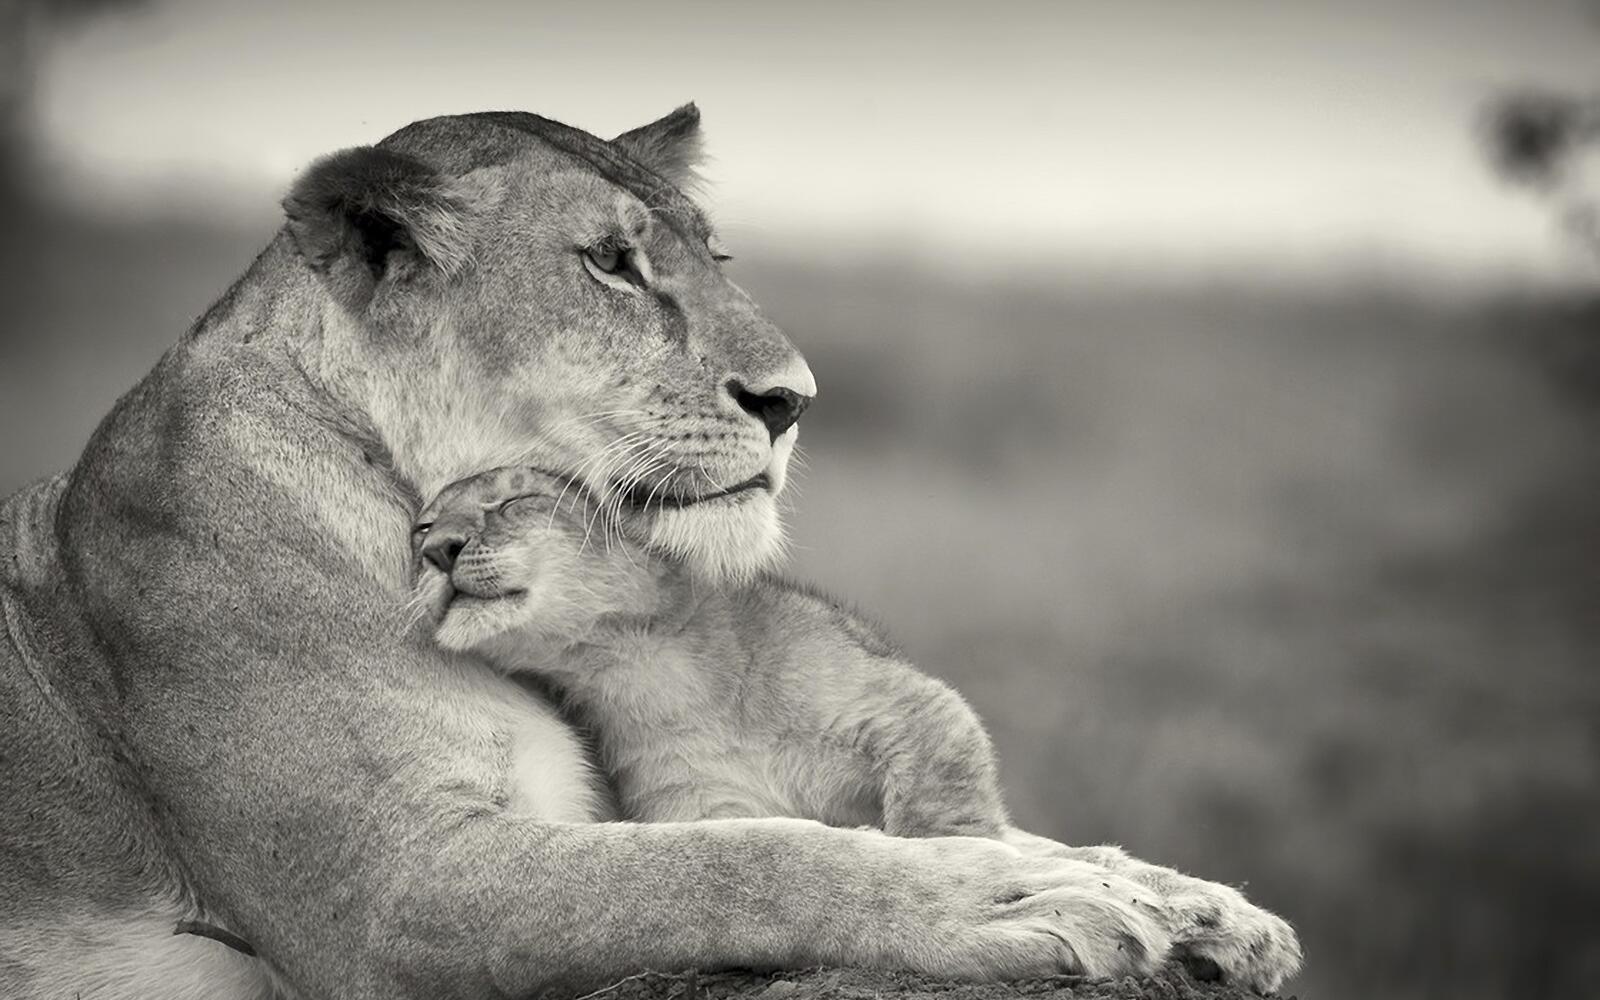 Wallpapers animals baby animals lion on the desktop